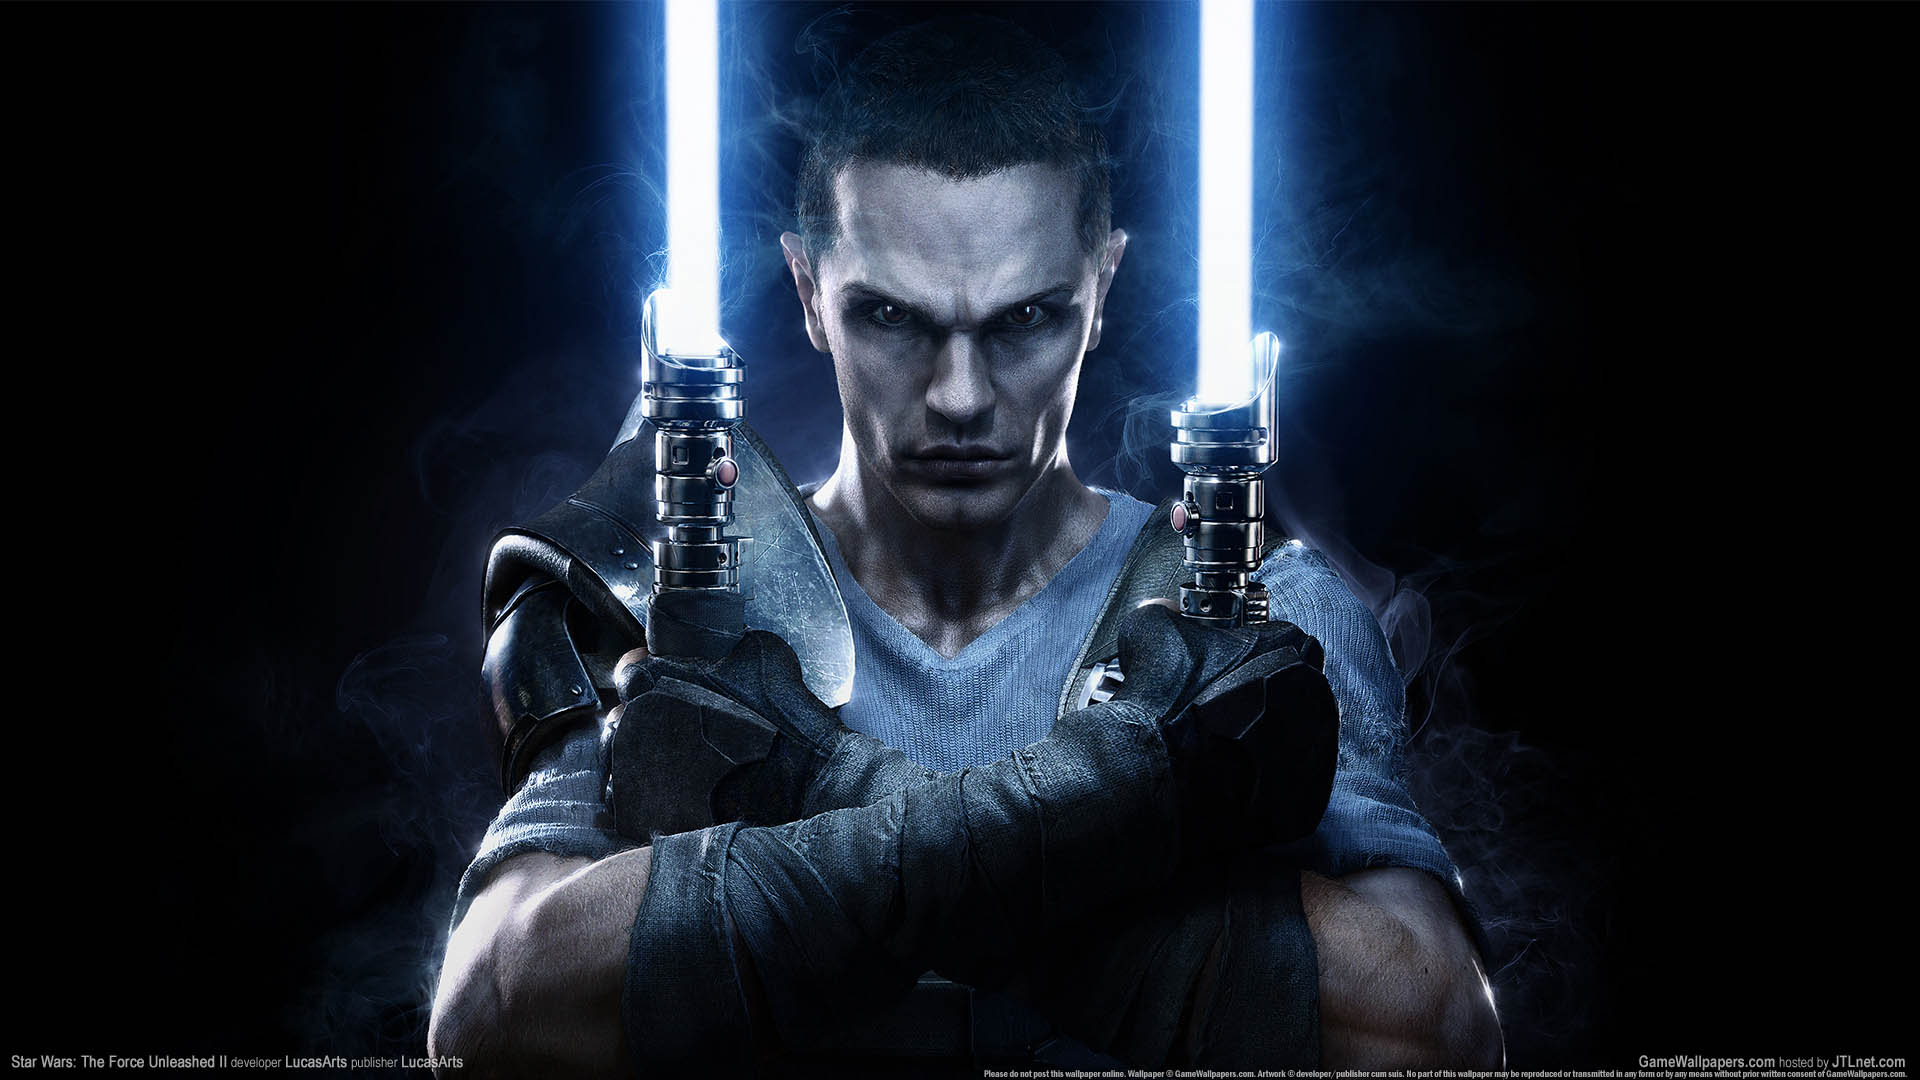 Star Wars: The Force Unleashed 2 achtergrond 01 1920x1080